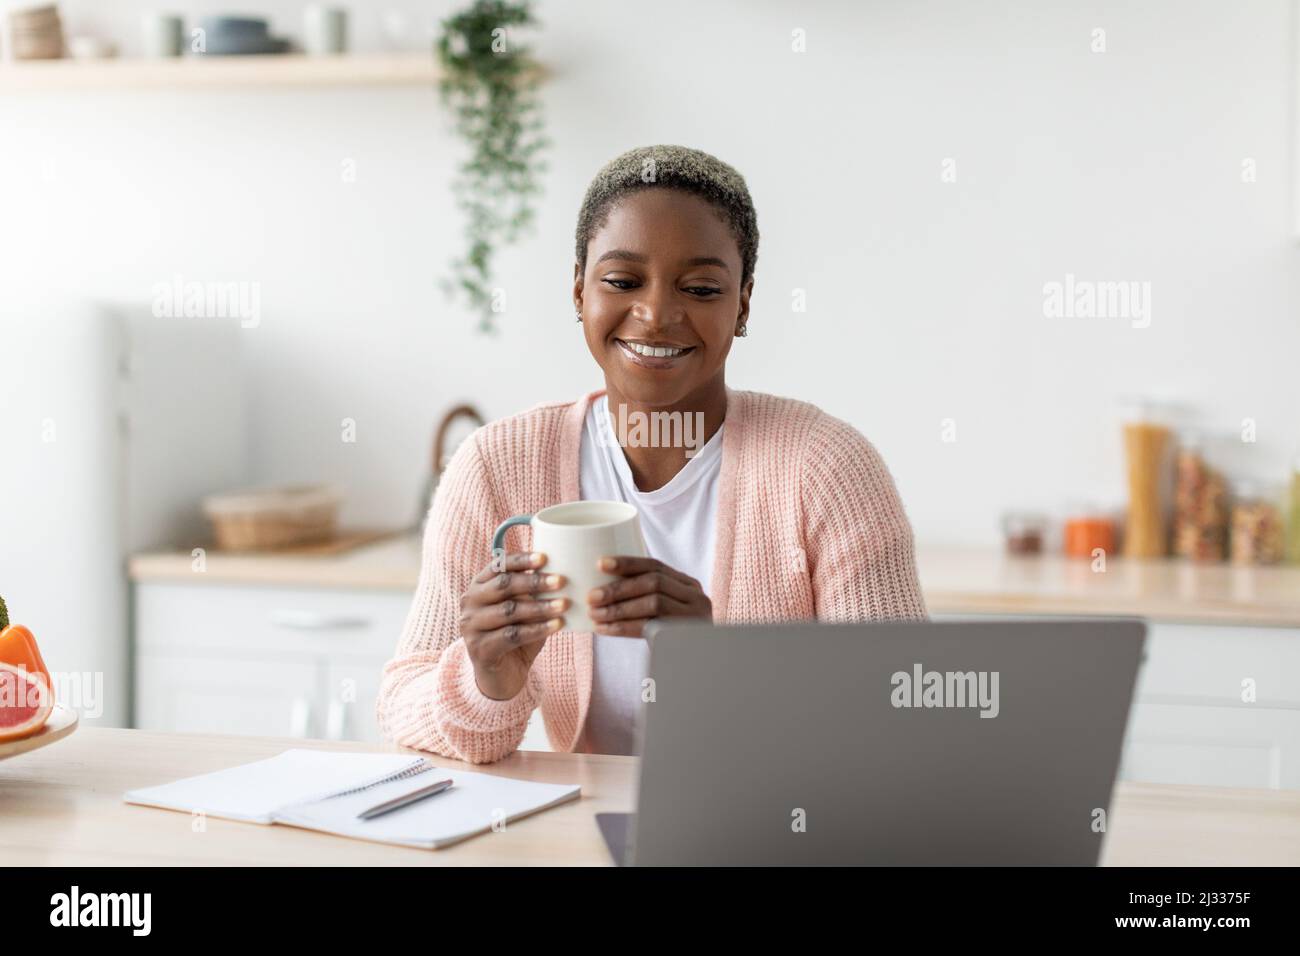 Happy millennial african american woman hold cup and work with laptop in modern minimalist kitchen interior Stock Photo